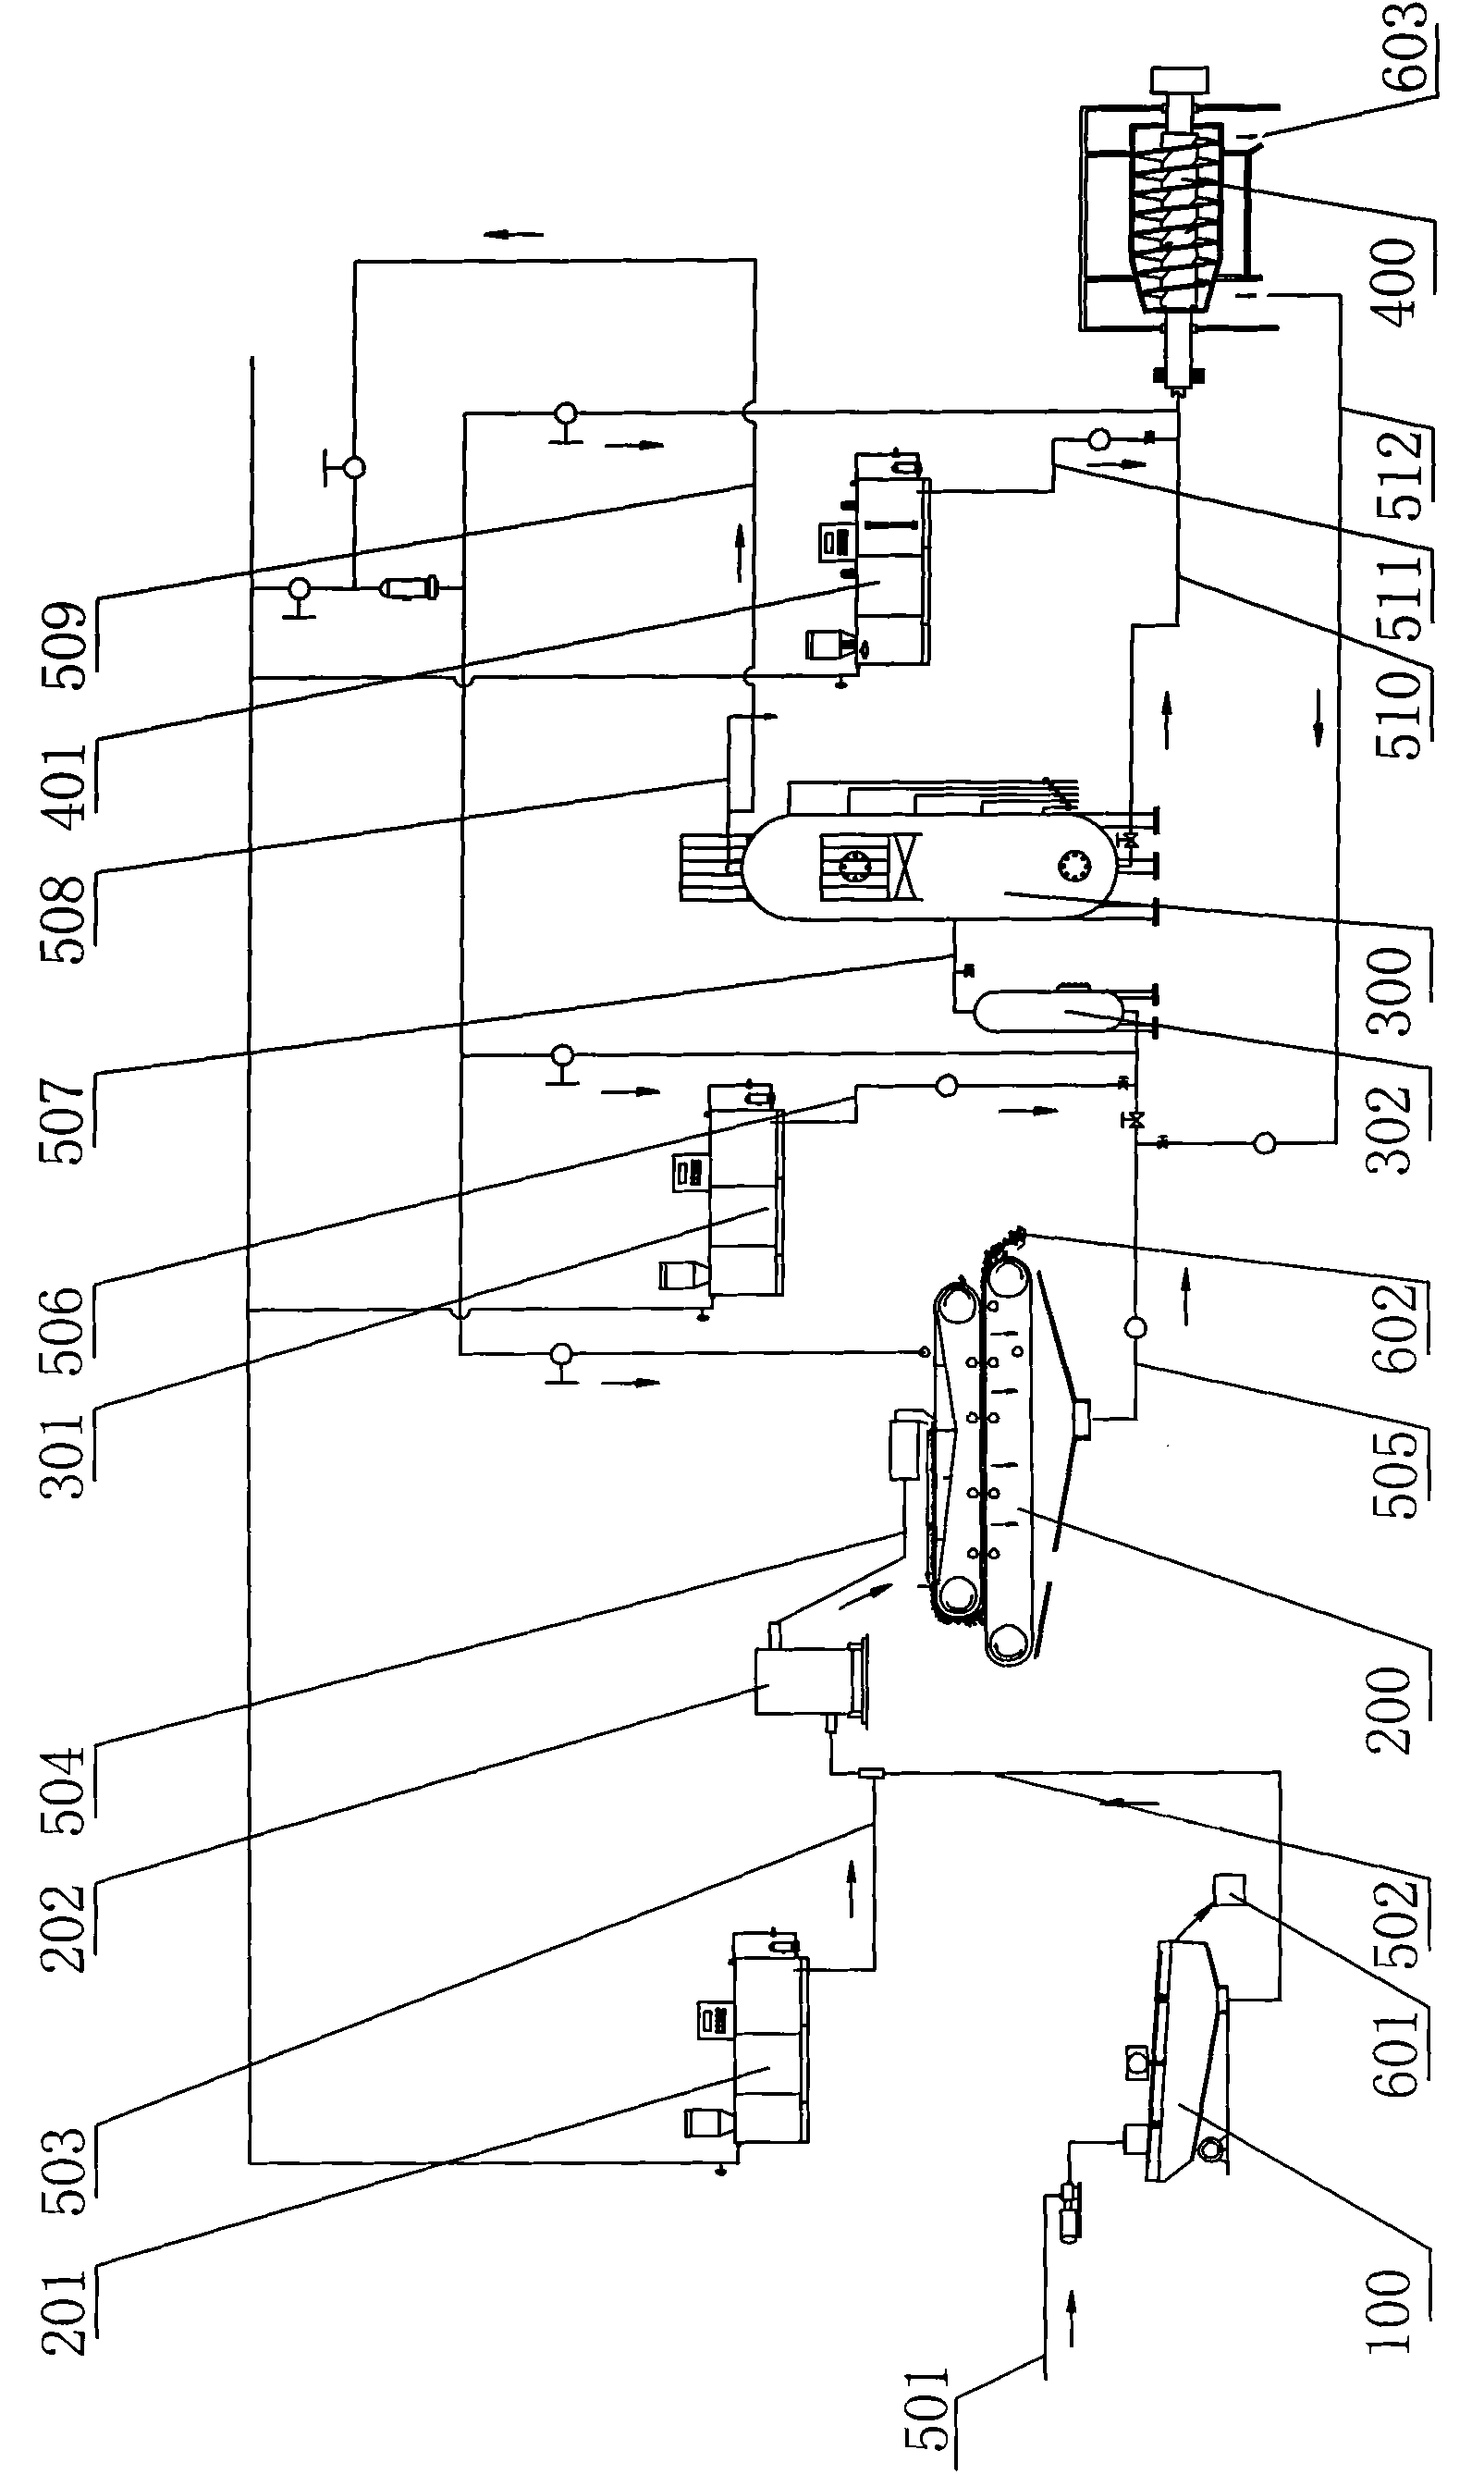 Device and method for dewatering and drying mud under water